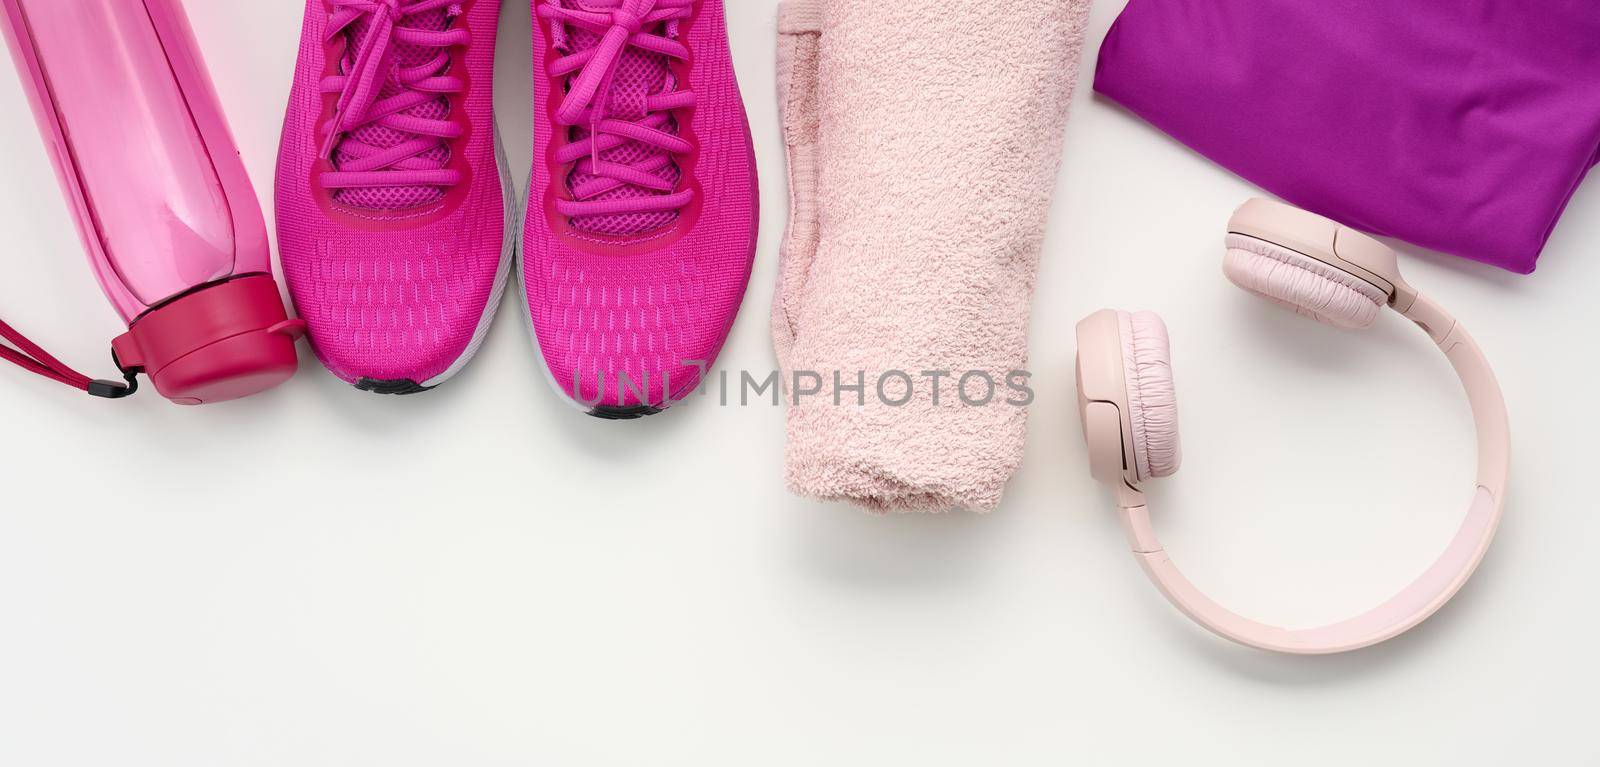 a pair of textile purple sports sneakers, wireless headphones, a towel and a bottle of water on a white background by ndanko